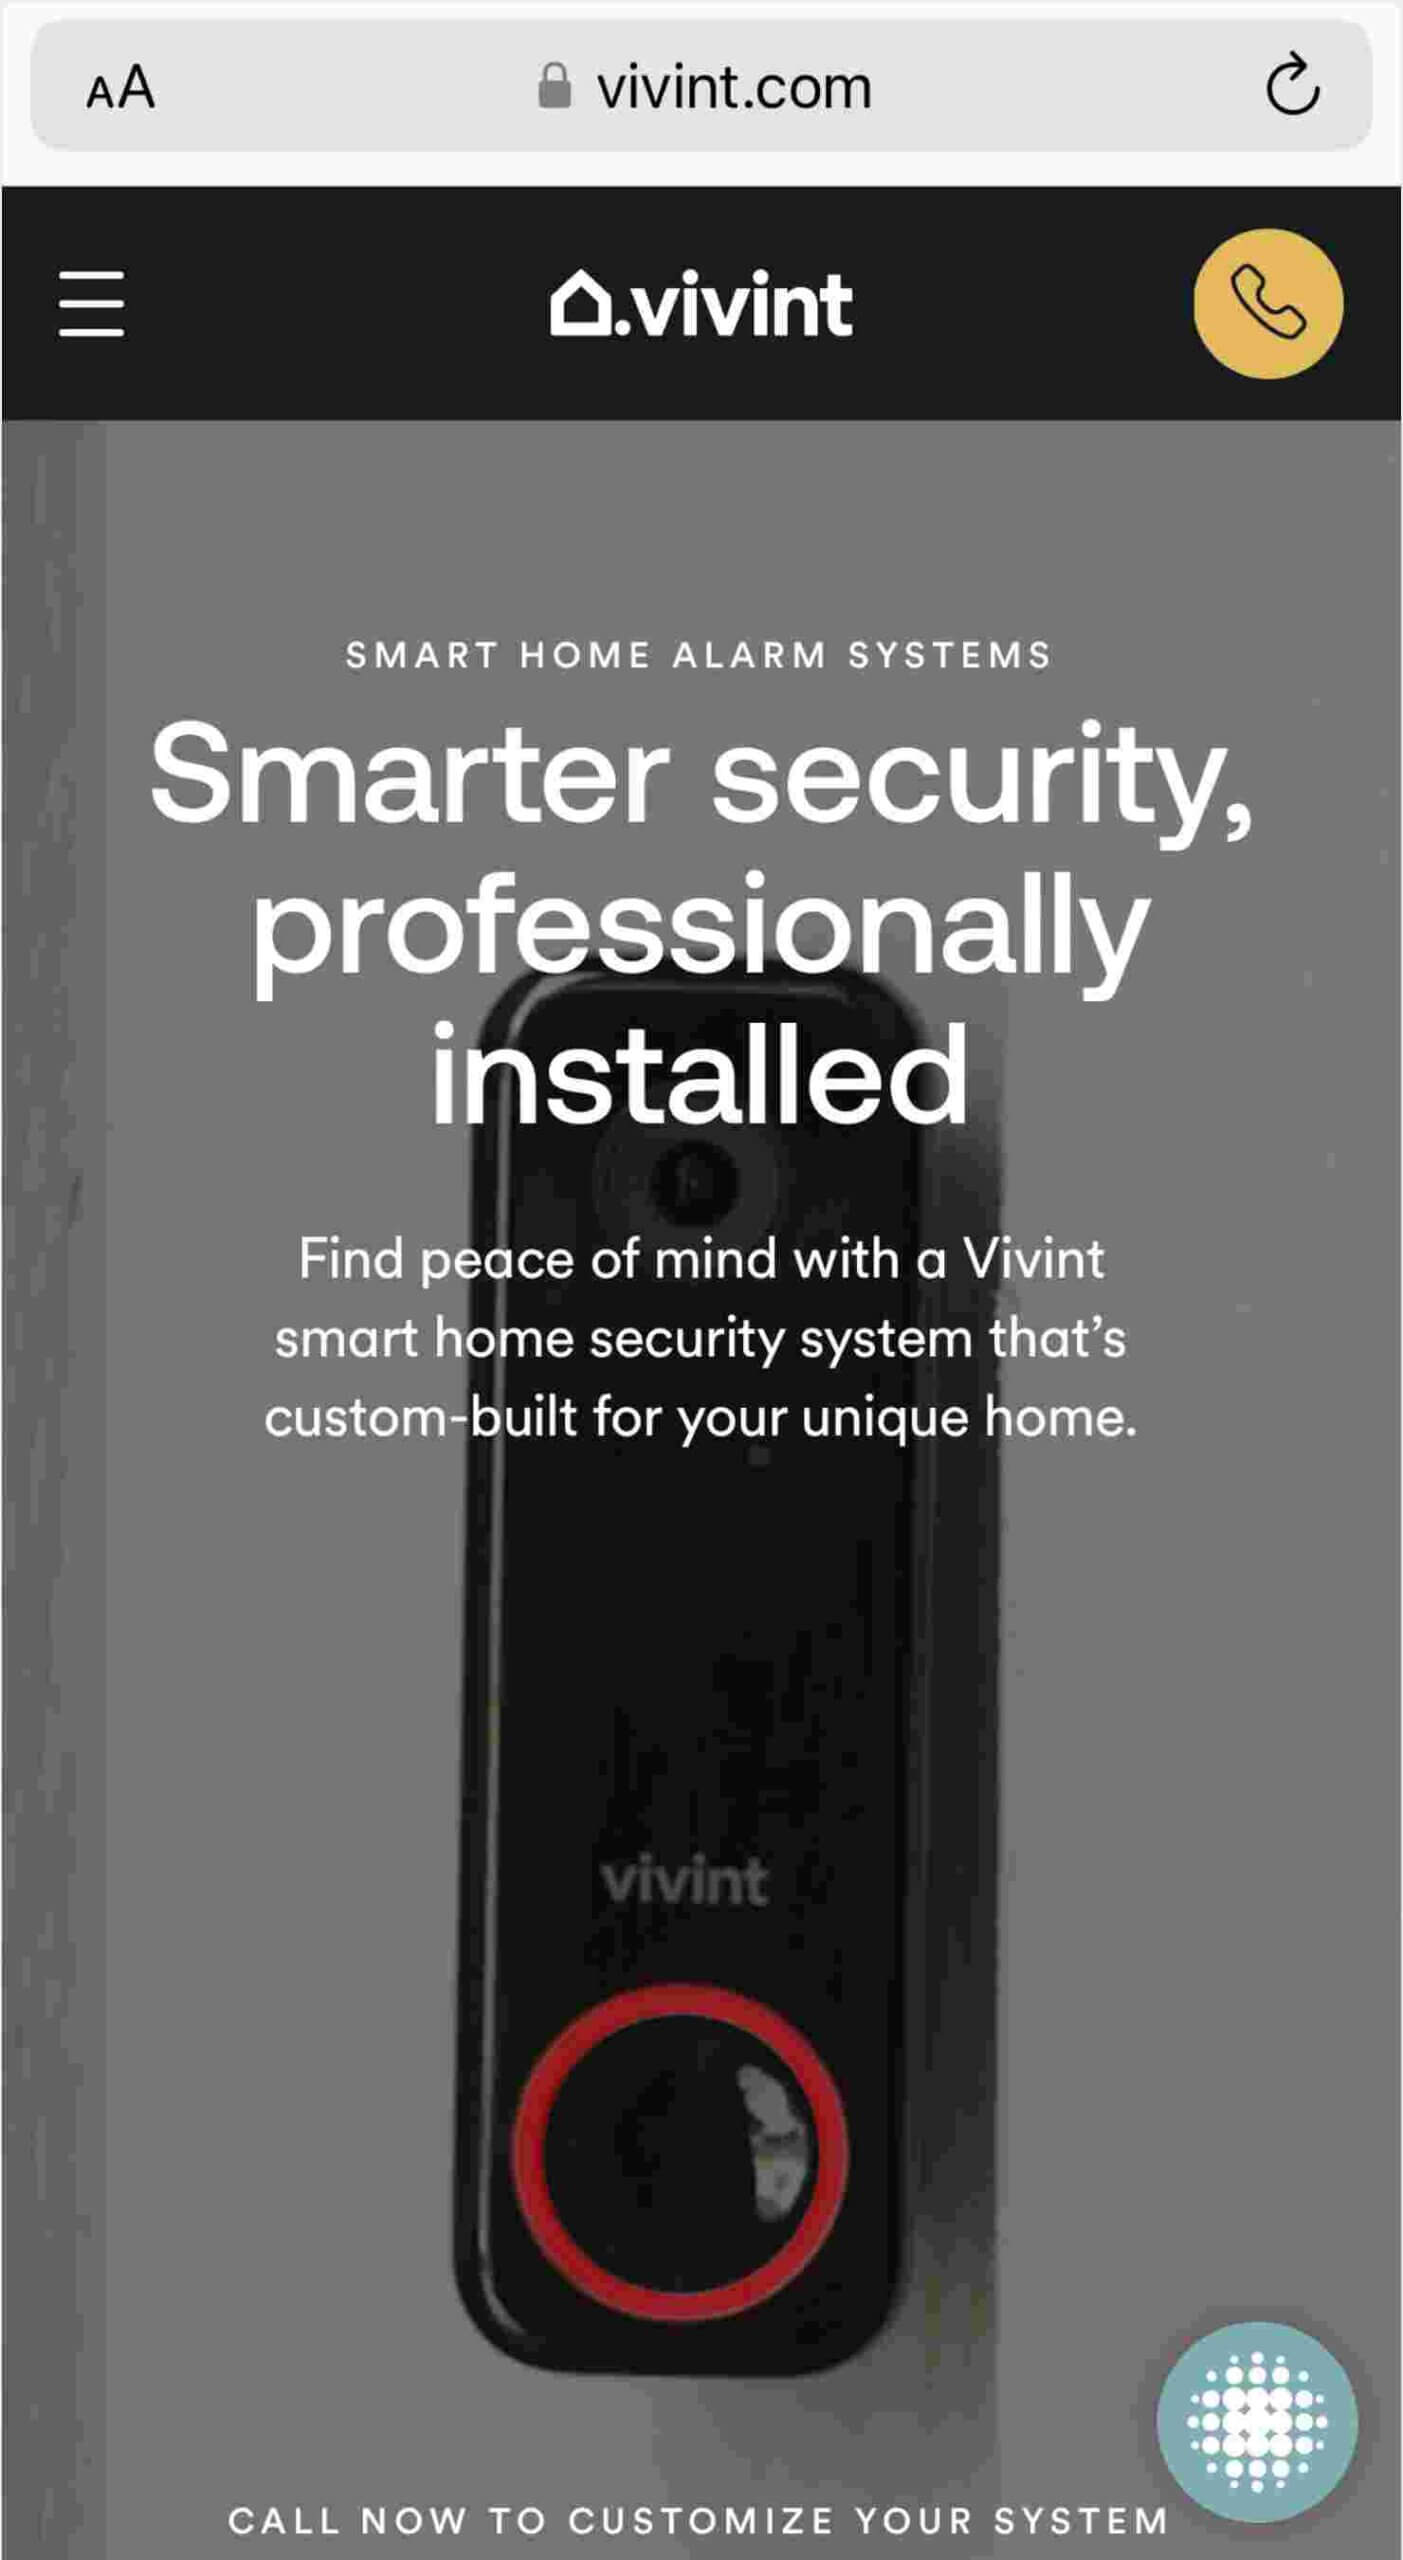 Mobile landing page screenshot from Vivint.com showcasing their smart home alarm systems. The header displays the Vivint logo with a phone icon indicating a click-to-call button. The page features bold text that reads 'Smarter security, professionally installed' followed by a promotional message encouraging the customization of a smart home security system for unique homes. The page design is sleek, with a focus on a single product image of the alarm system. At the bottom, text reads 'CALL NOW TO CUSTOMIZE YOUR SYSTEM,' indicating more information as the user scrolls